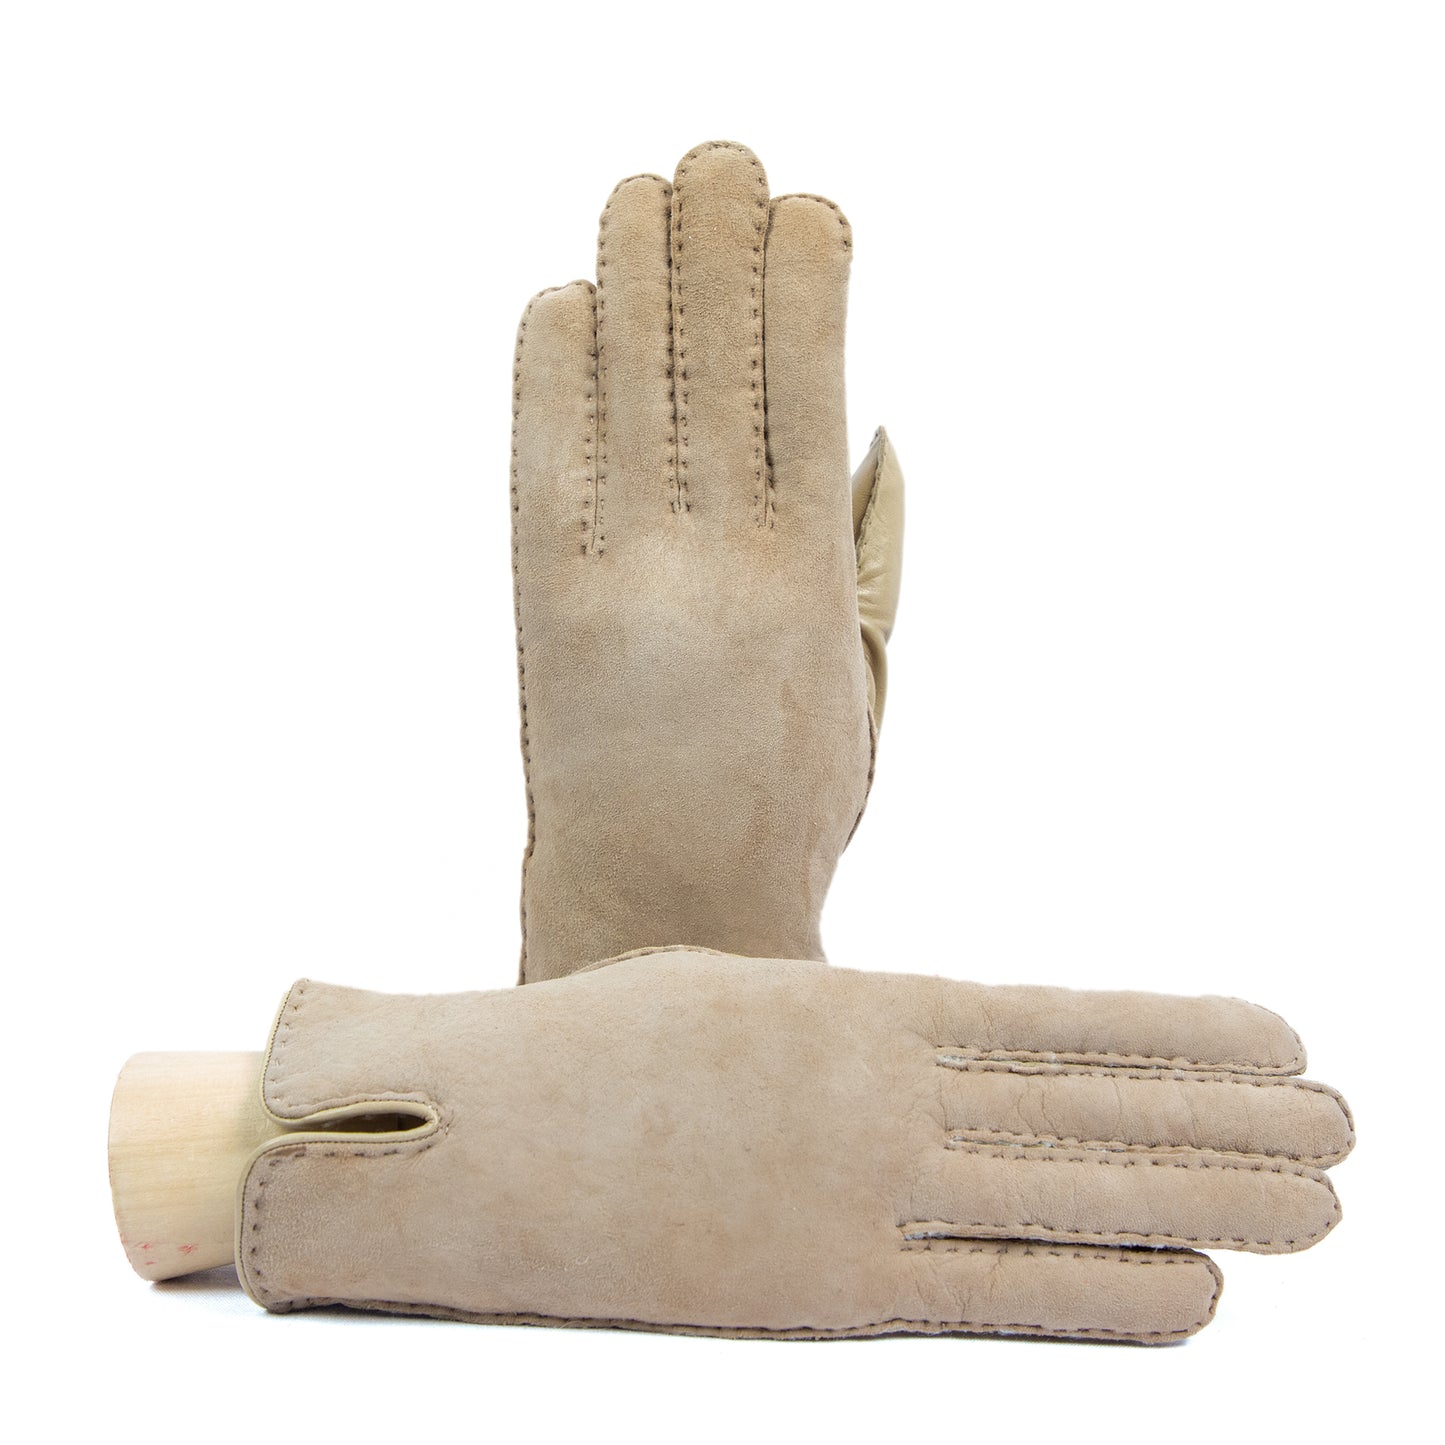 Women's alpaca curly lambskin gloves with with nappa leather piping detail